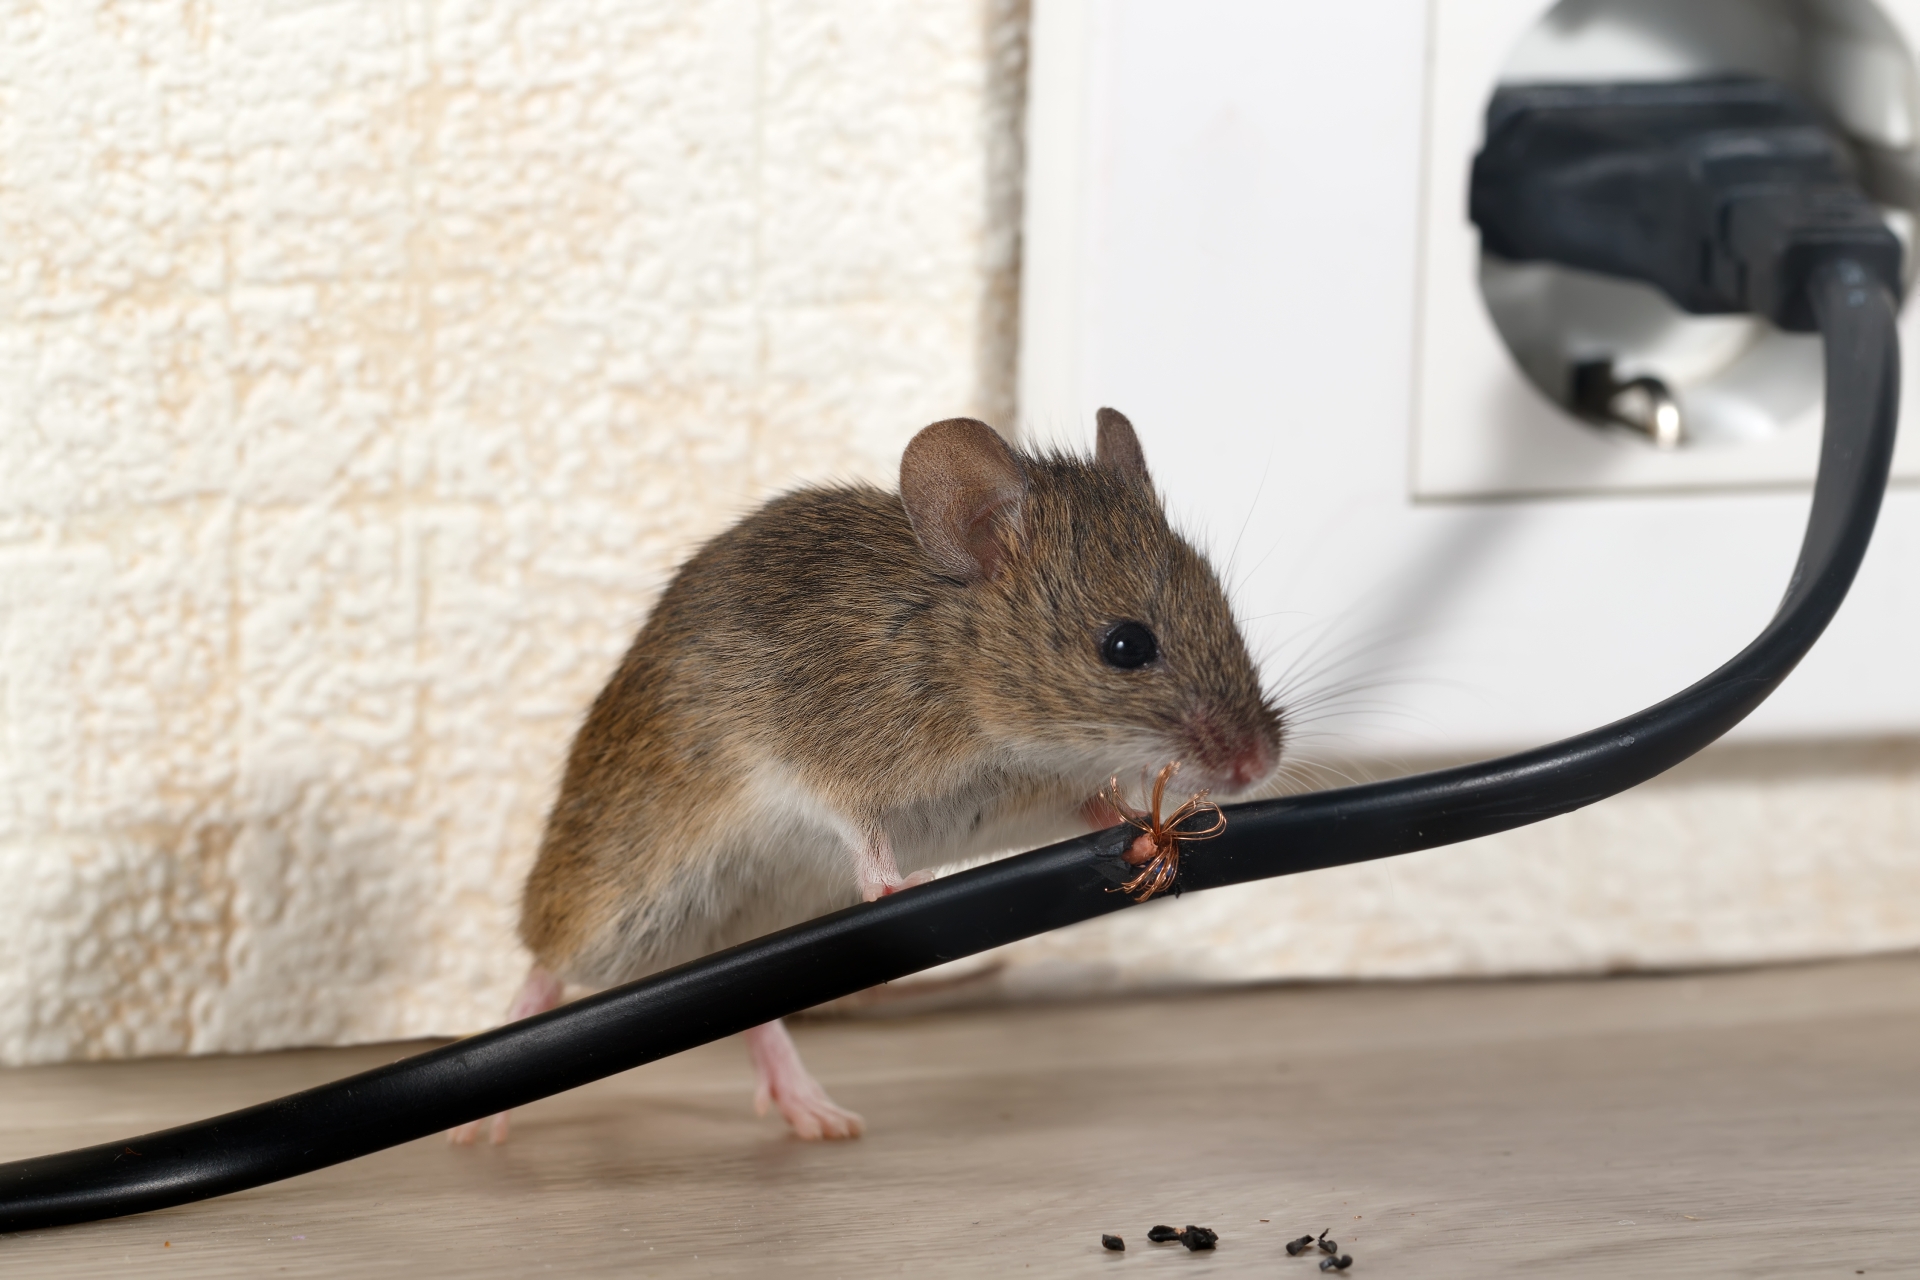 Mice Infestation, Pest Control in Lower Edmonton, N9. Call Now 020 8166 9746